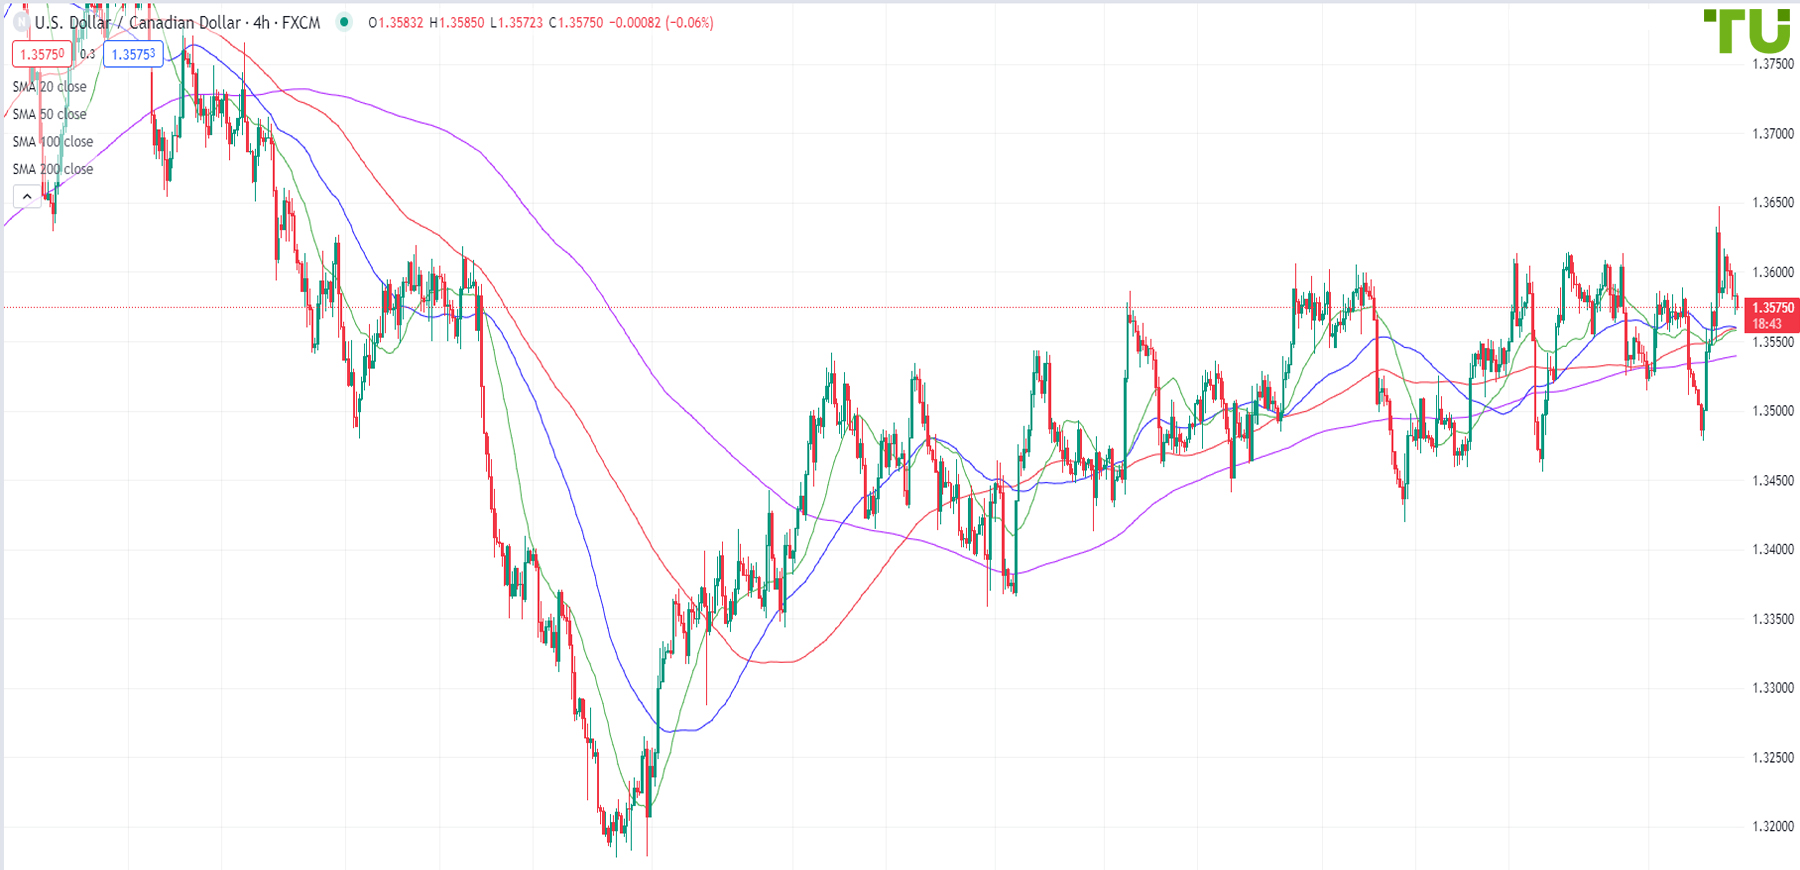 The dollar/loonie is testing support in the neighborhood of 1.3575